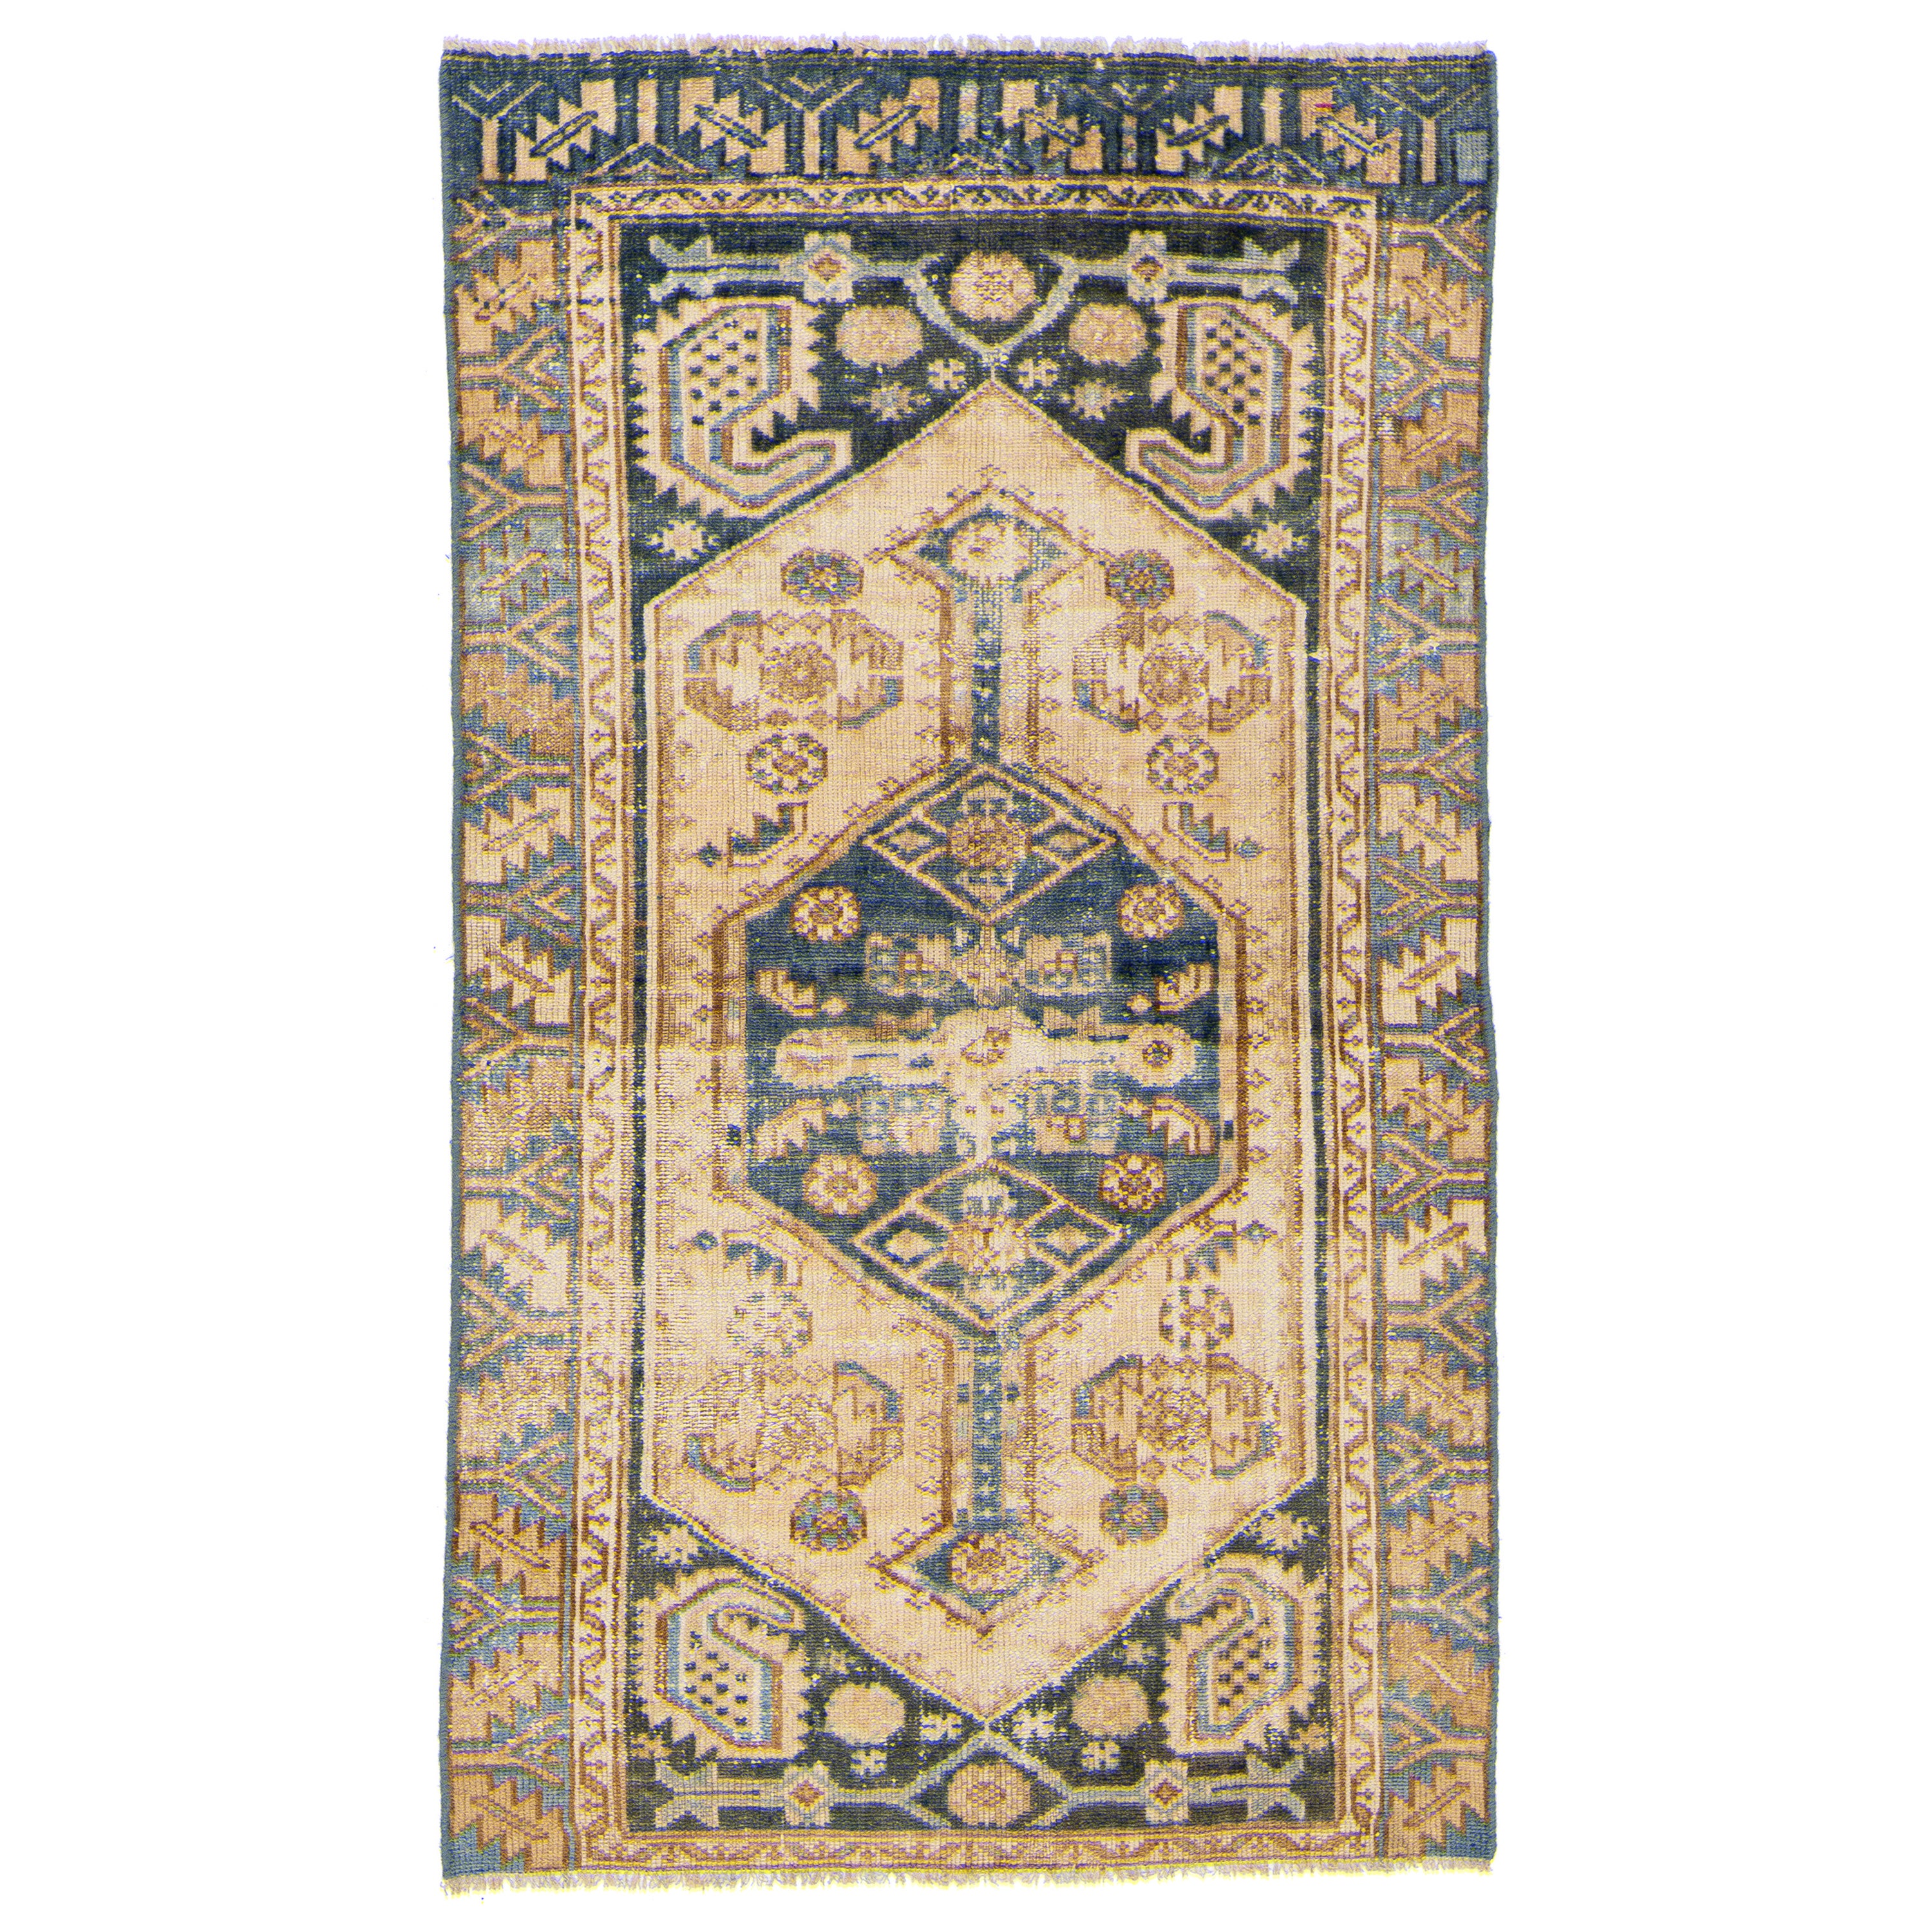  Antique Hamadan Tribal Wool Rug In Blue and Beige For Sale